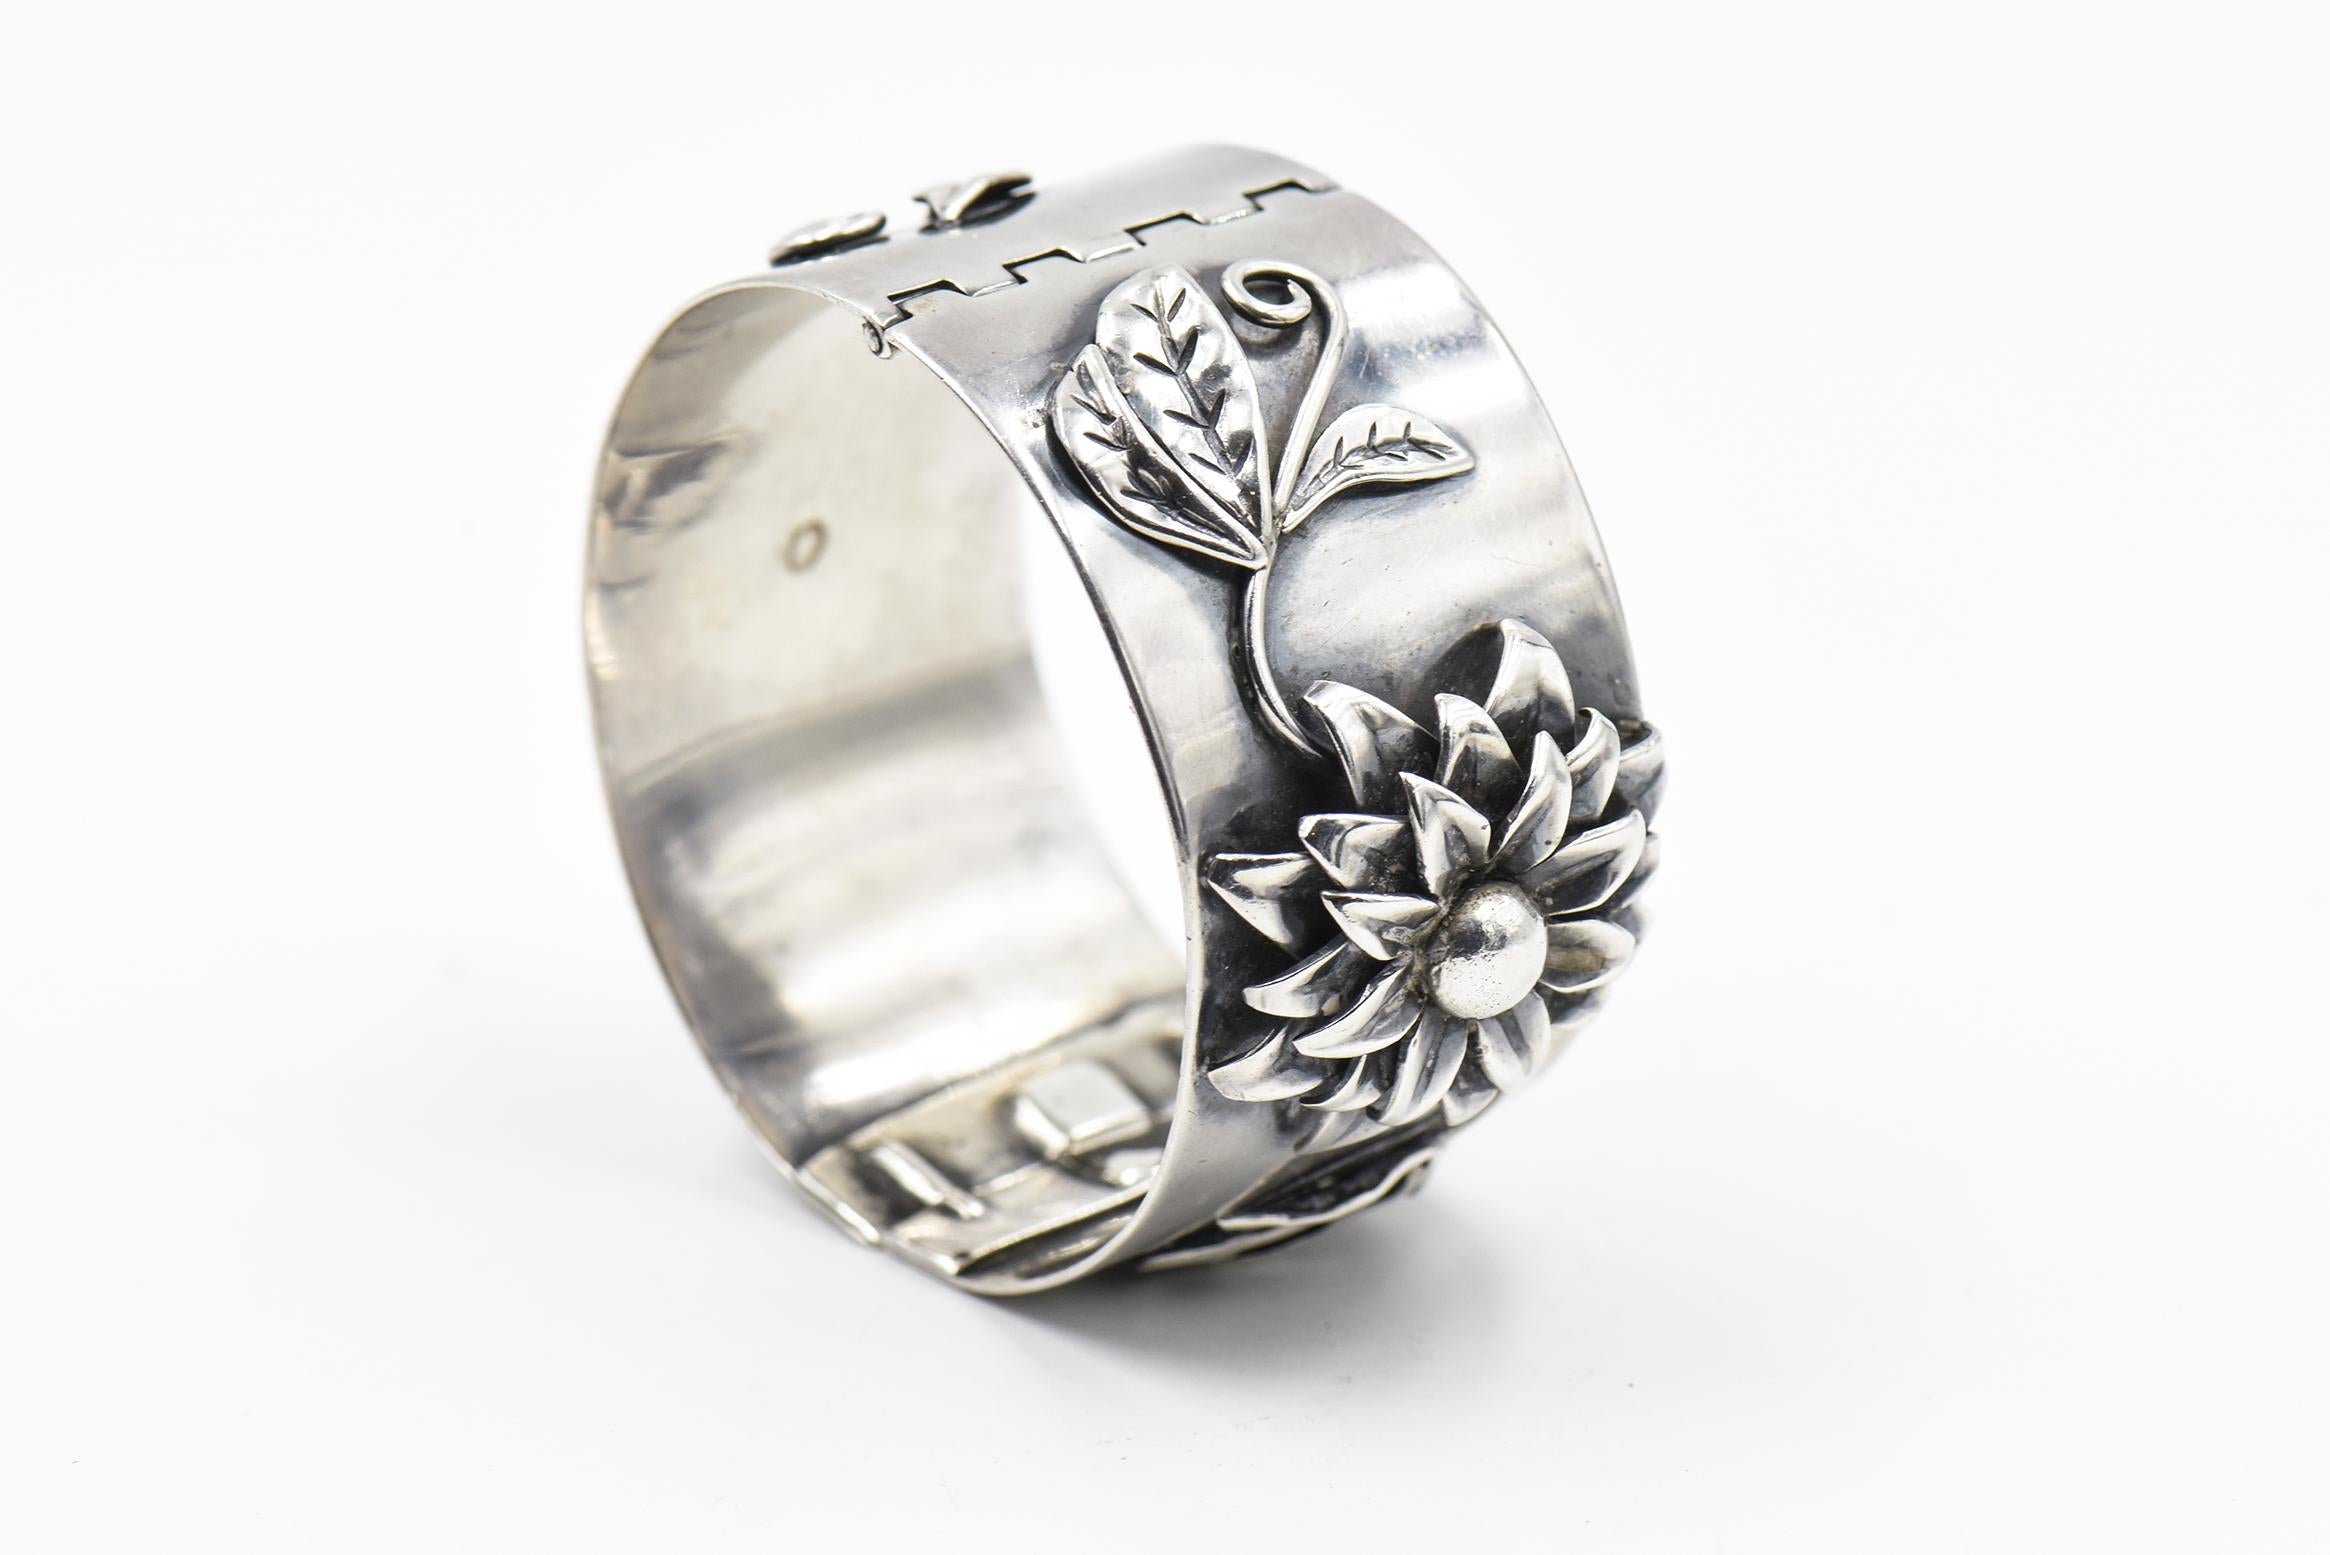 Applied Flower Floral Sterling Silver Bangle Bracelet by Heidi In Good Condition For Sale In Miami Beach, FL